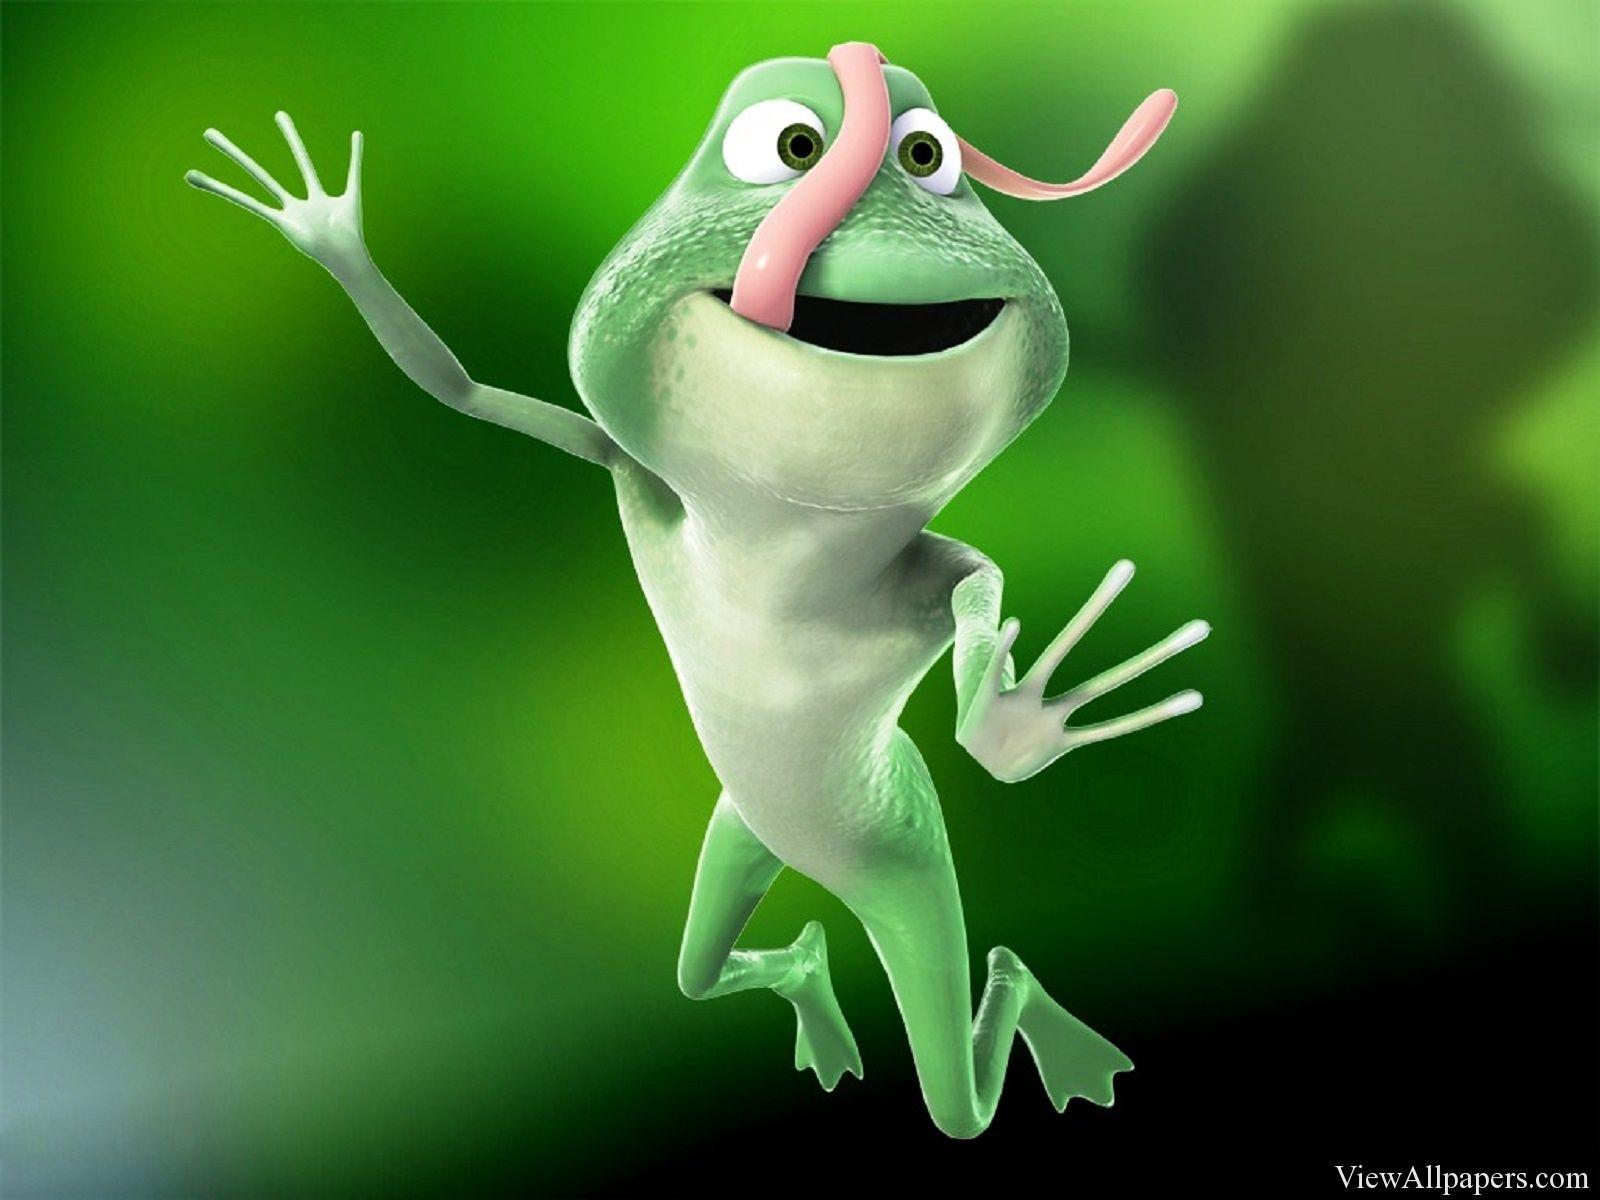 3d Animation Wallpaper For Windows 7 Free Download Image Num 68